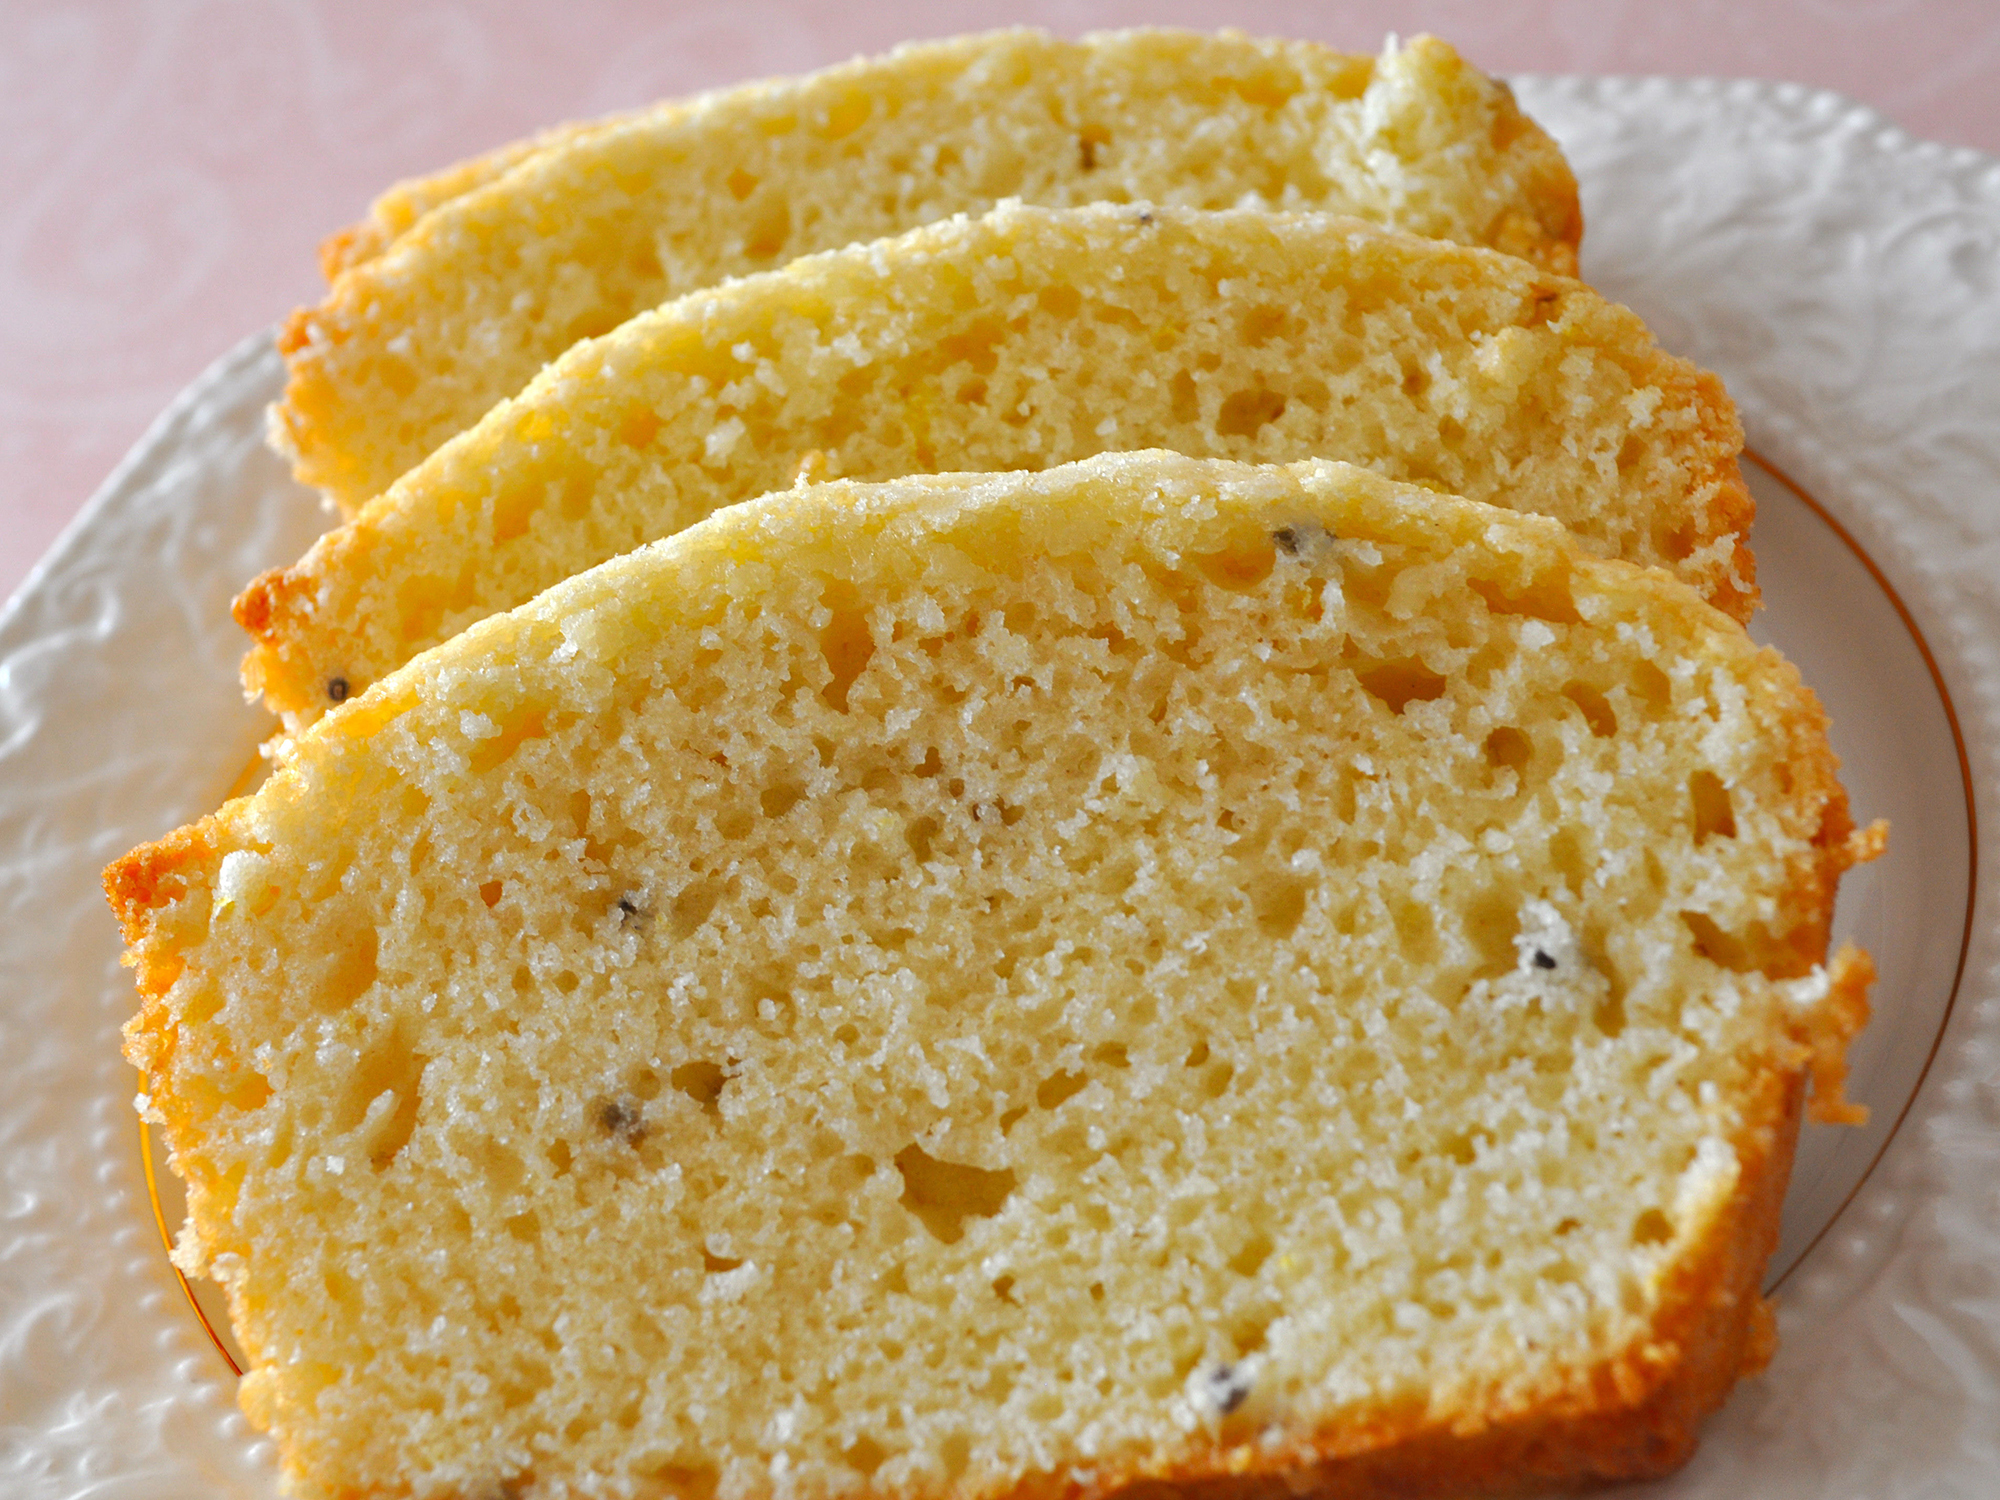 close up view of sliced Lavender Tea Bread on a plate